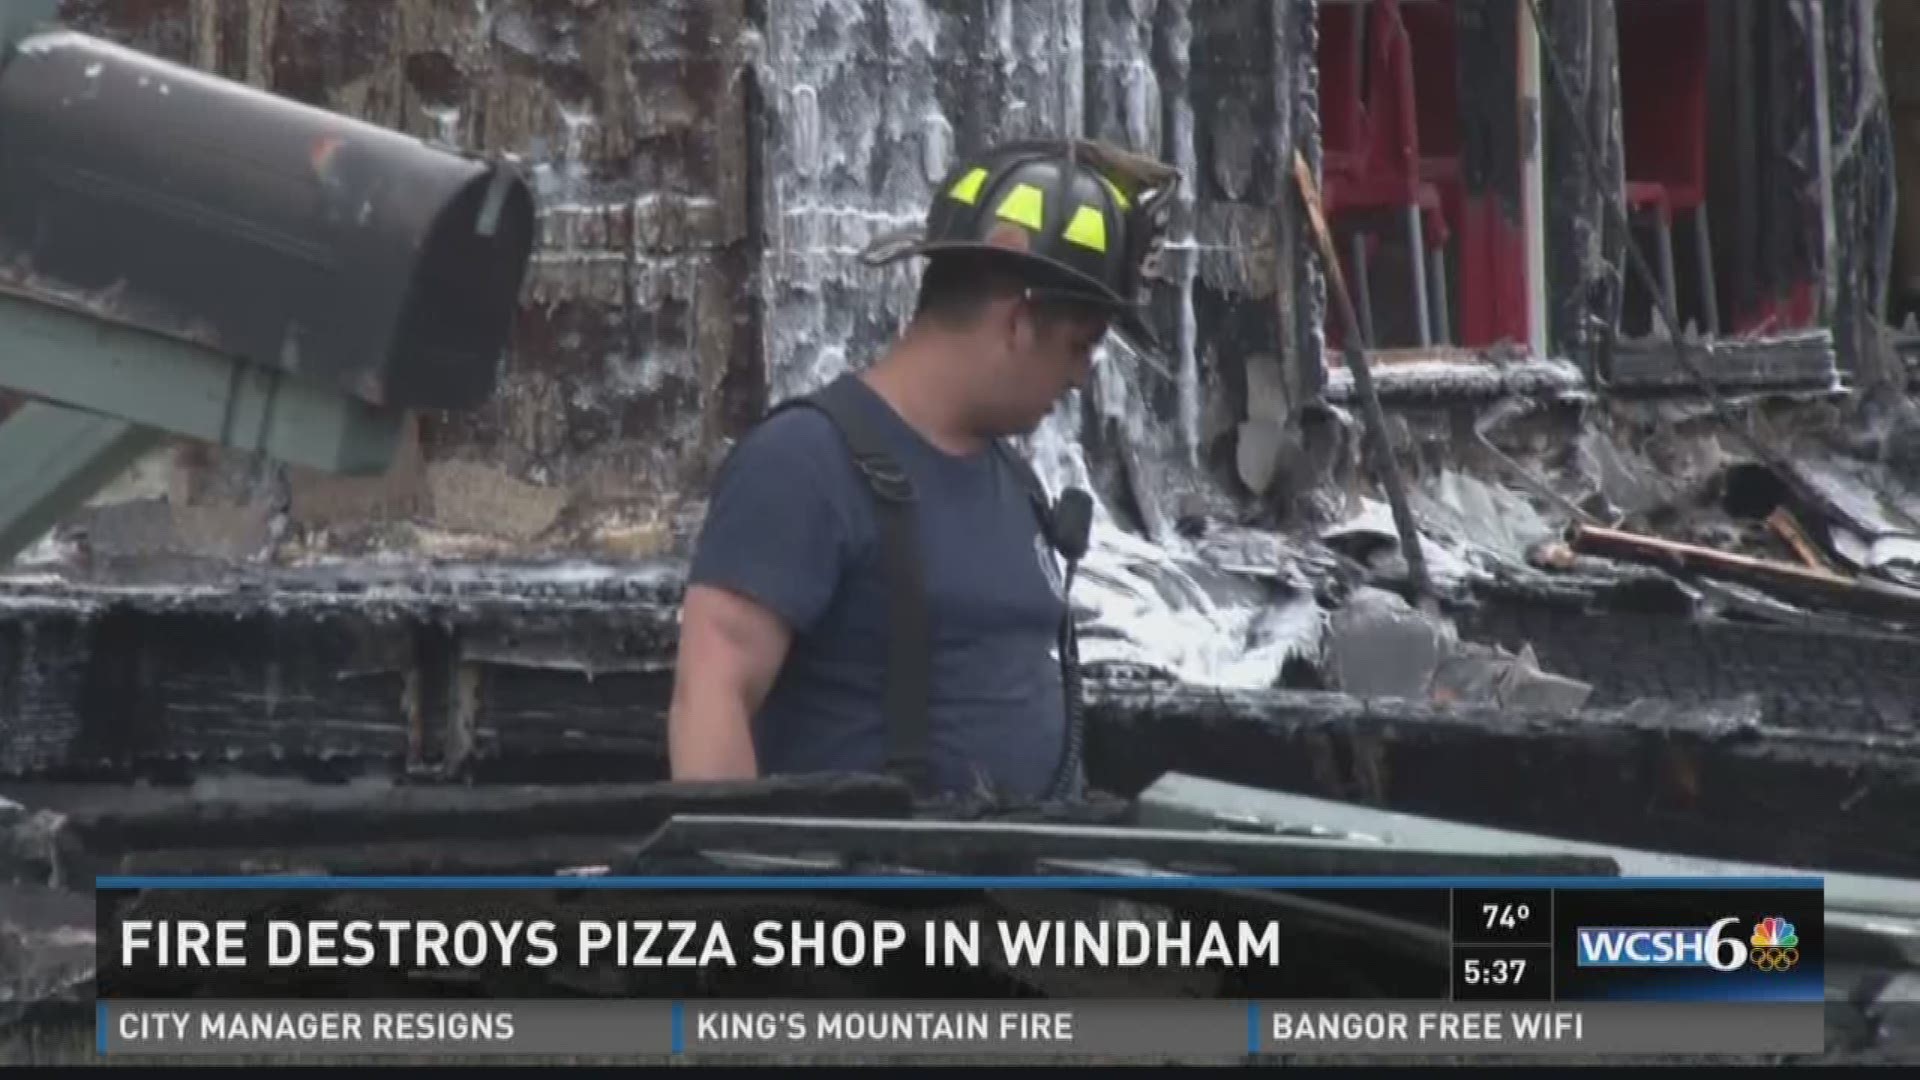 Fire destroys pizza shop in Windham